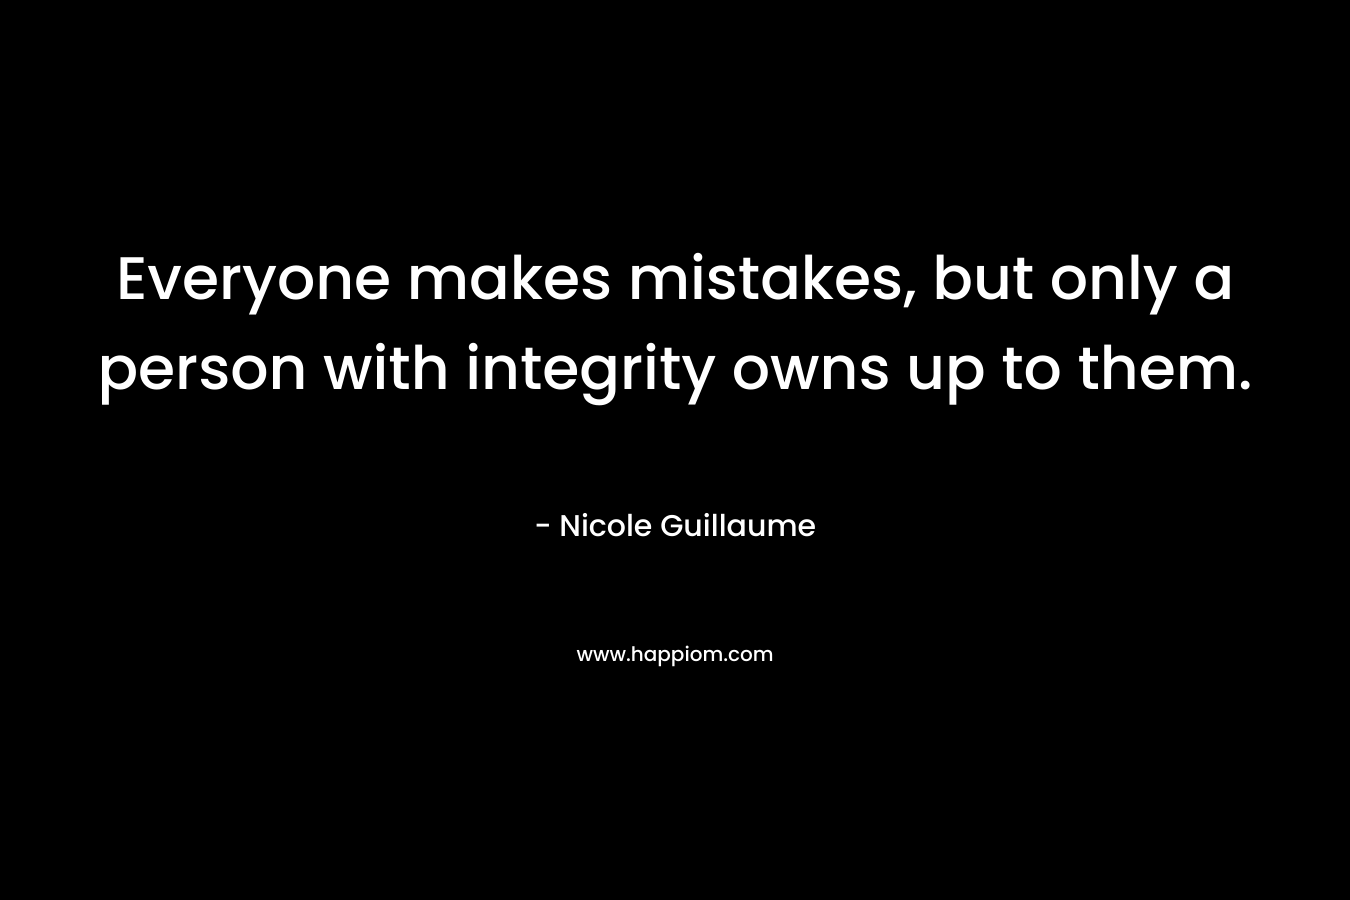 Everyone makes mistakes, but only a person with integrity owns up to them.